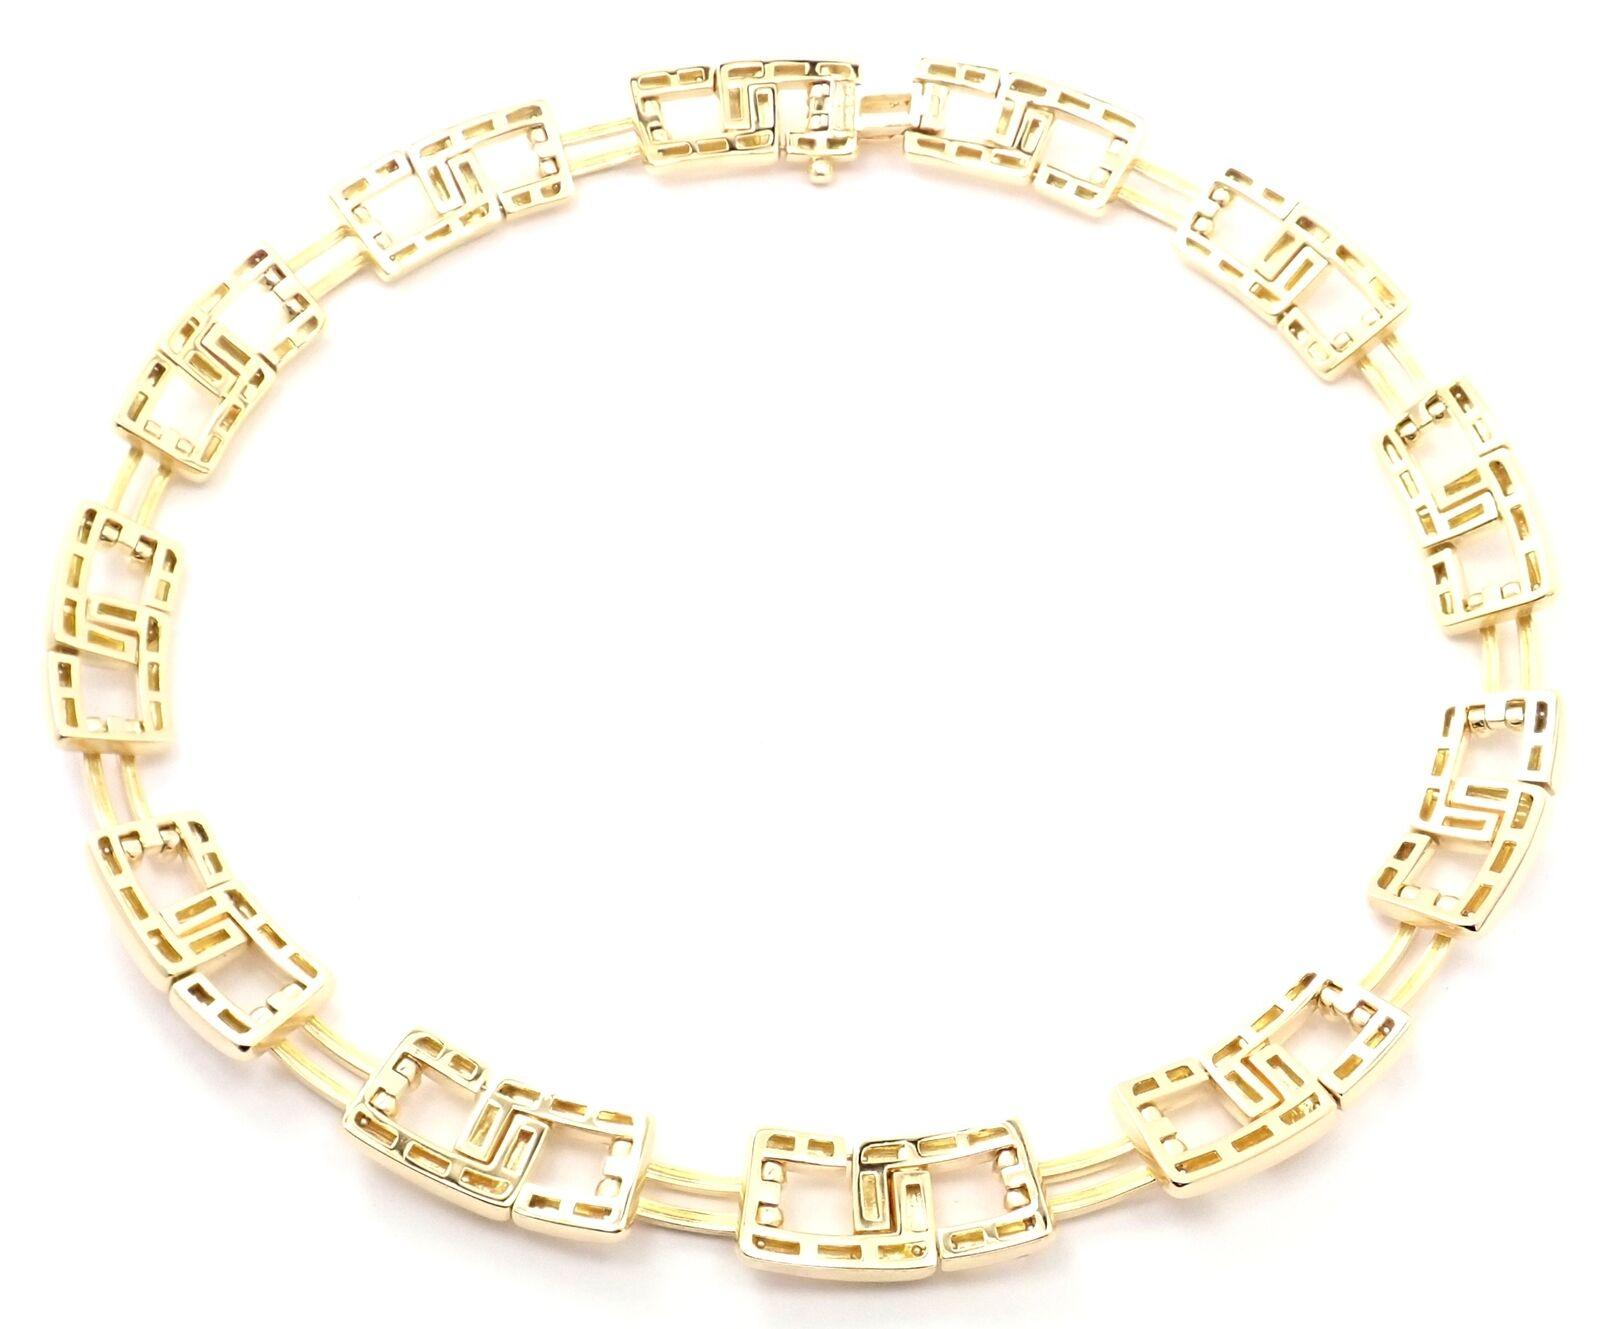 Tiffany & Co. Wide Link Yellow Gold Necklace In Excellent Condition For Sale In Holland, PA